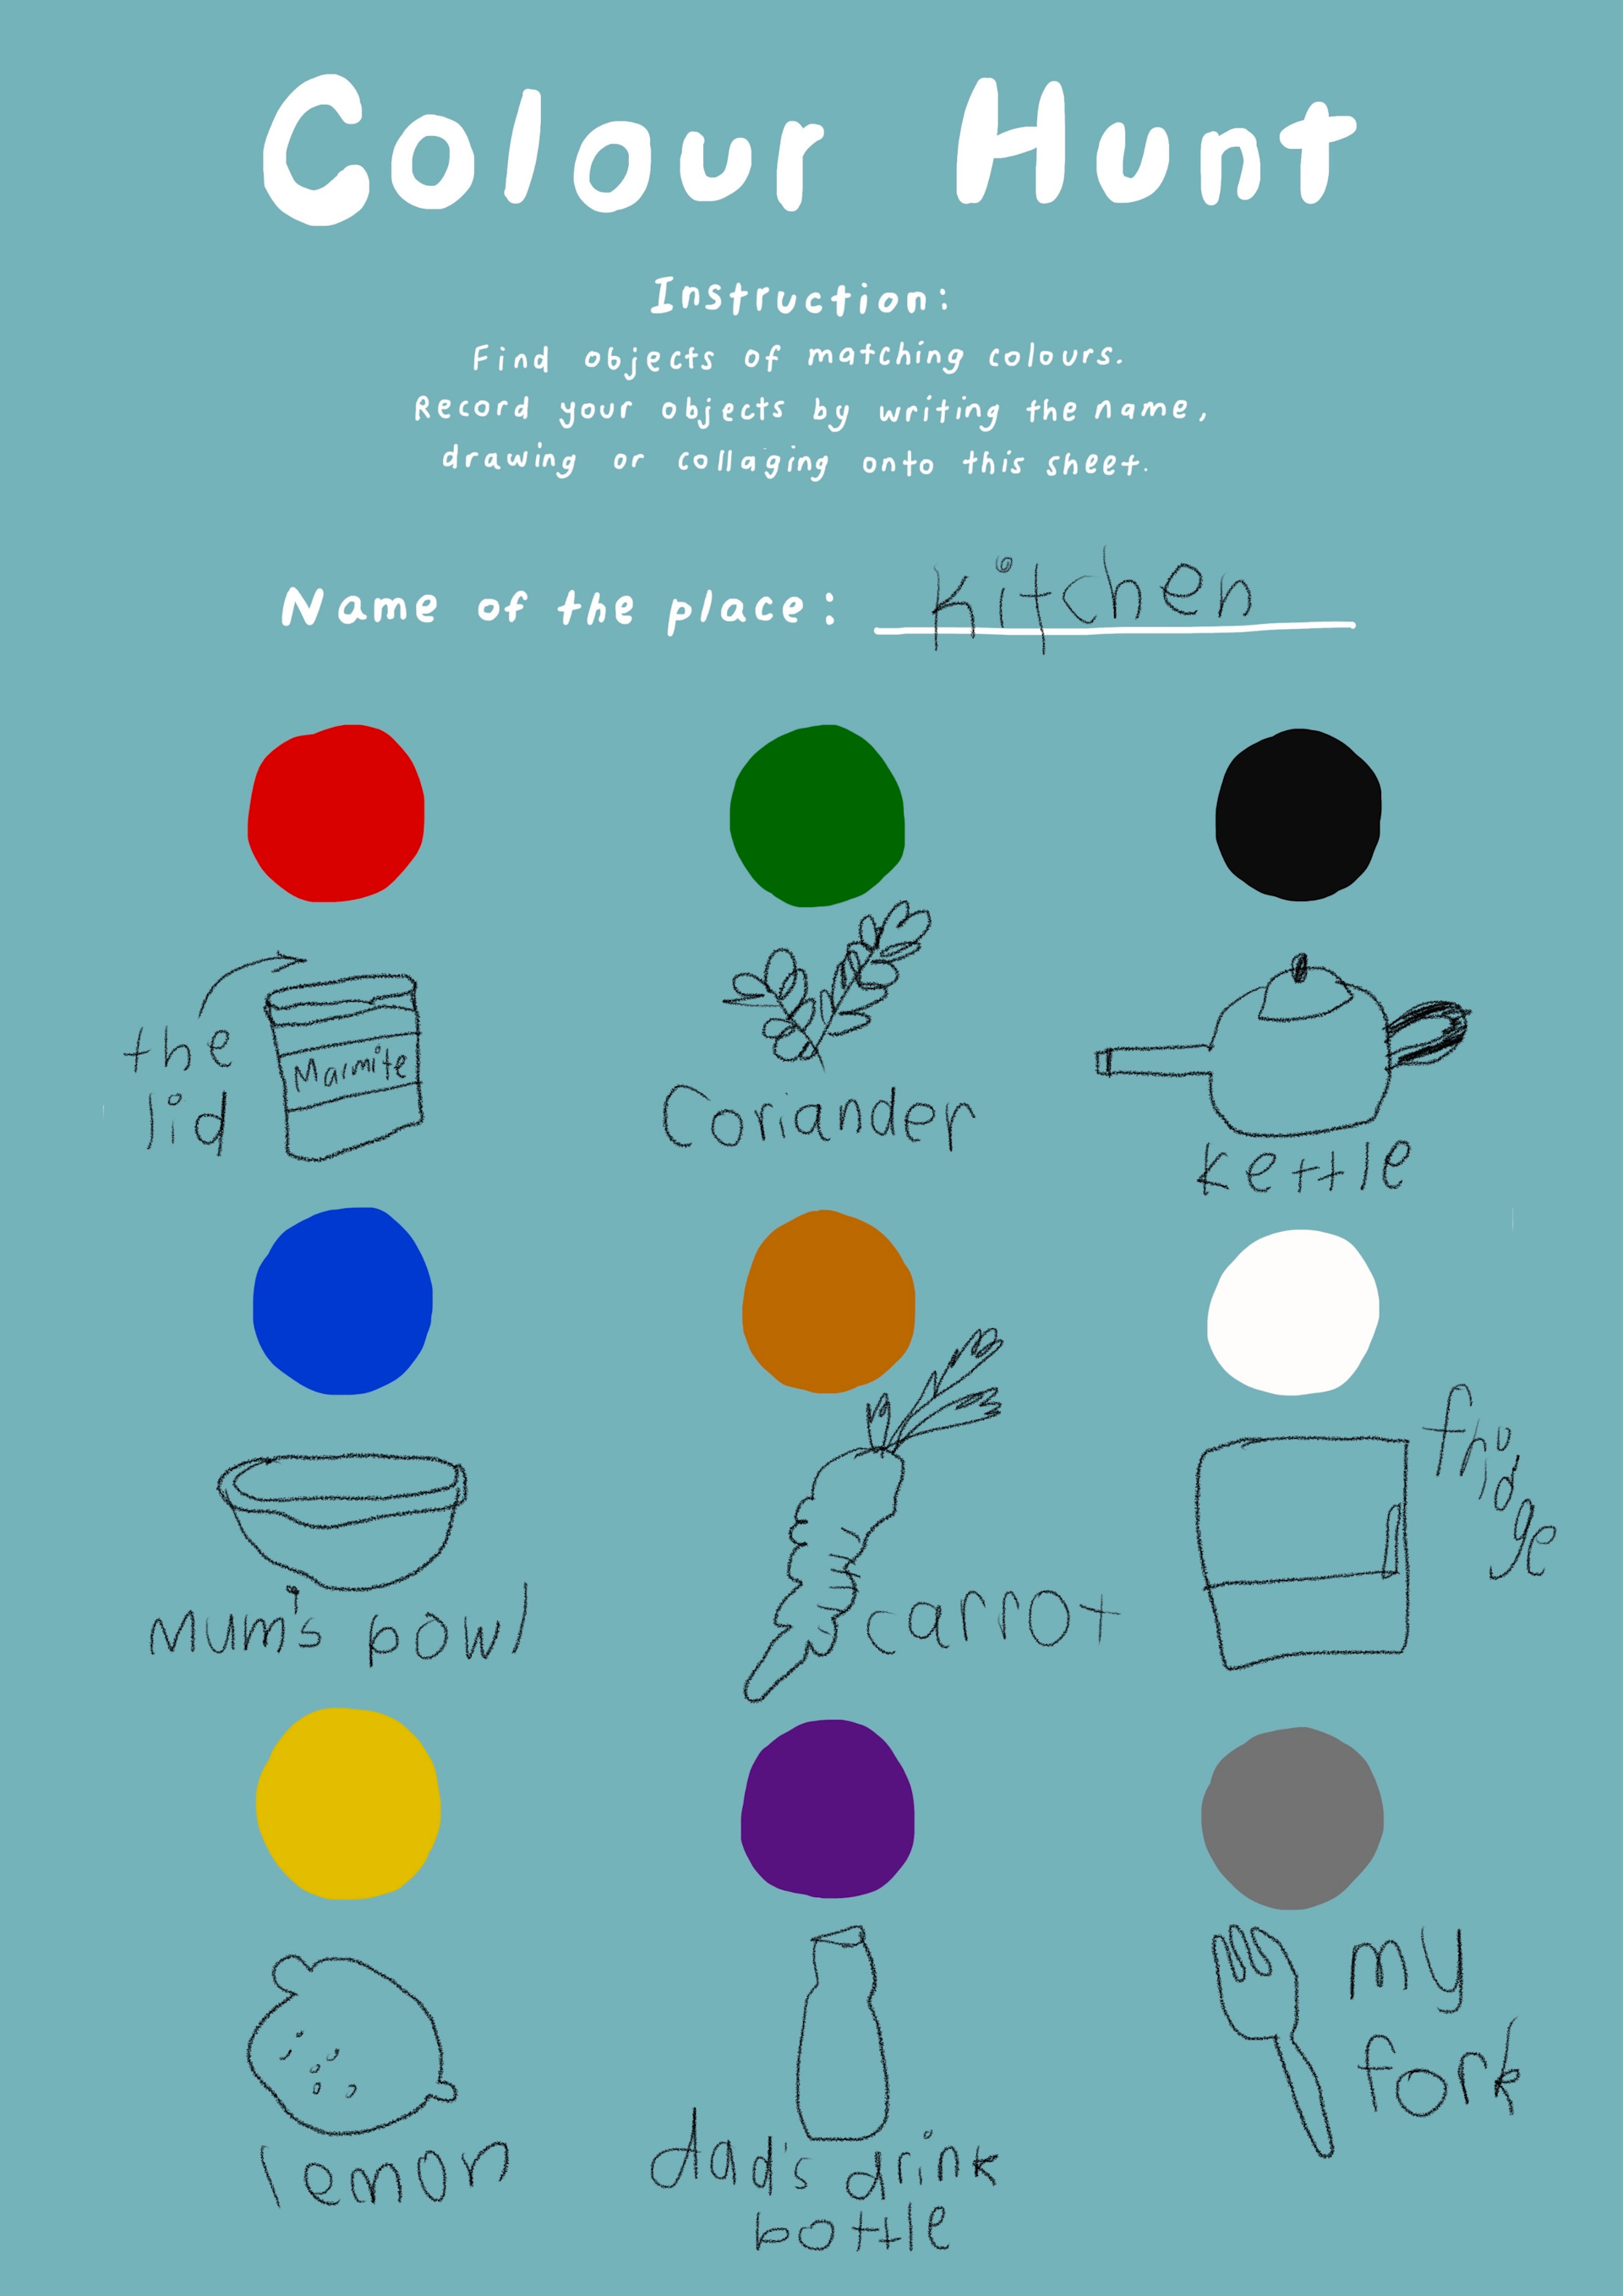 Colour hunt poster in English and Te Reo